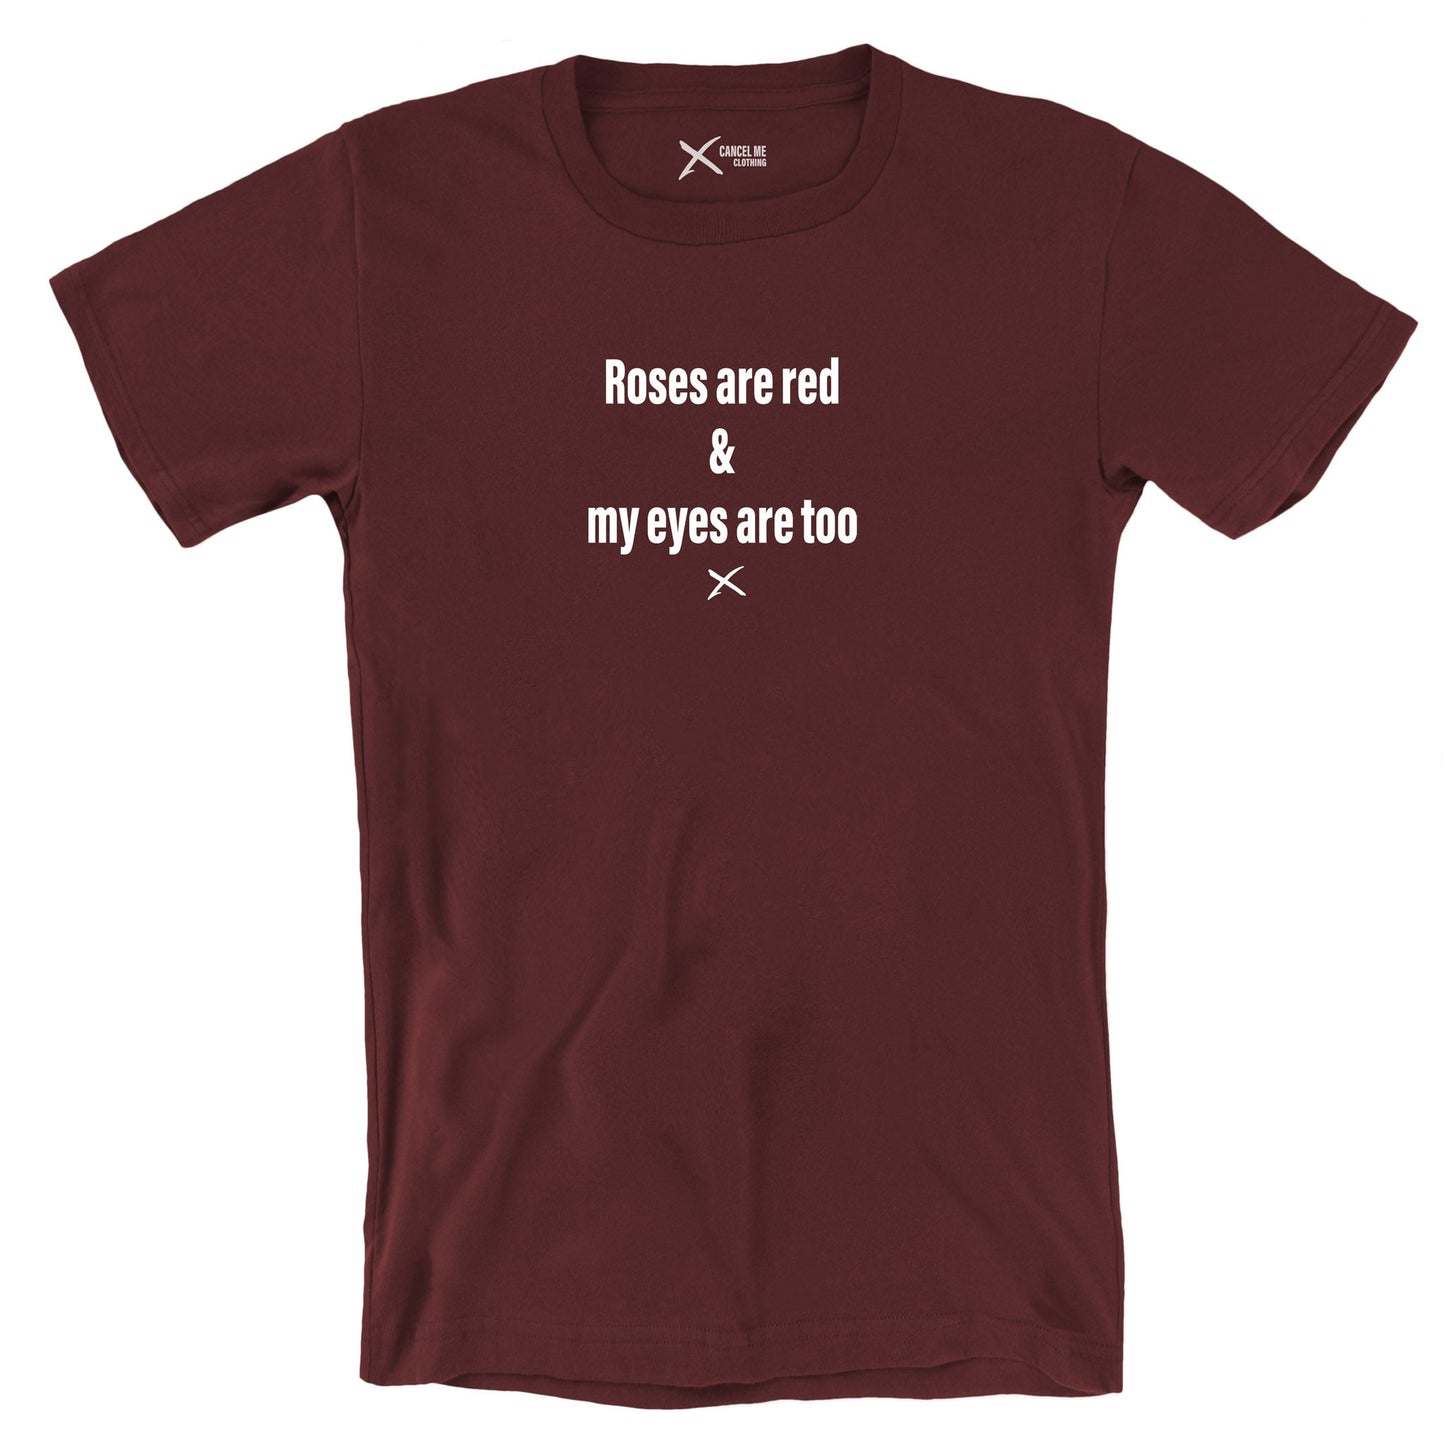 Roses are red & my eyes are too - Shirt